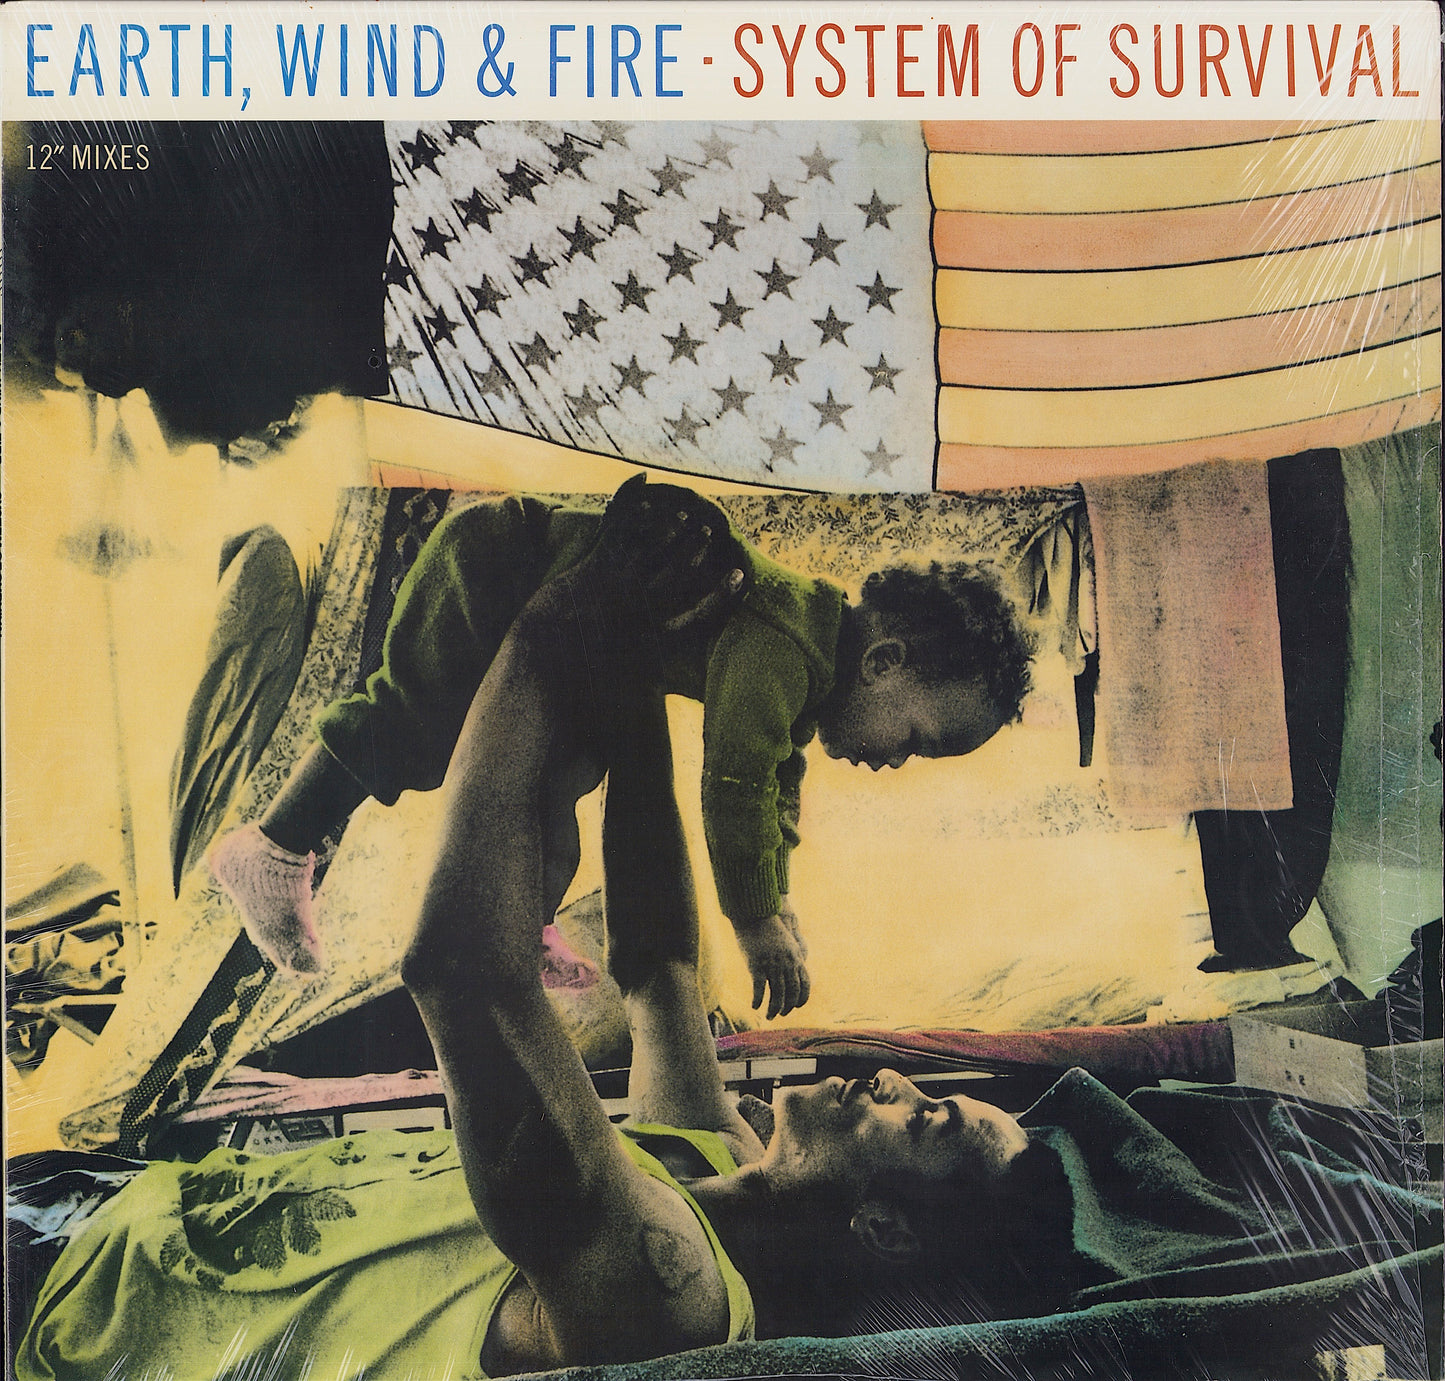 Earth, Wind & Fire ‎- System Of Survival 12" Mixes Vinyl 12"